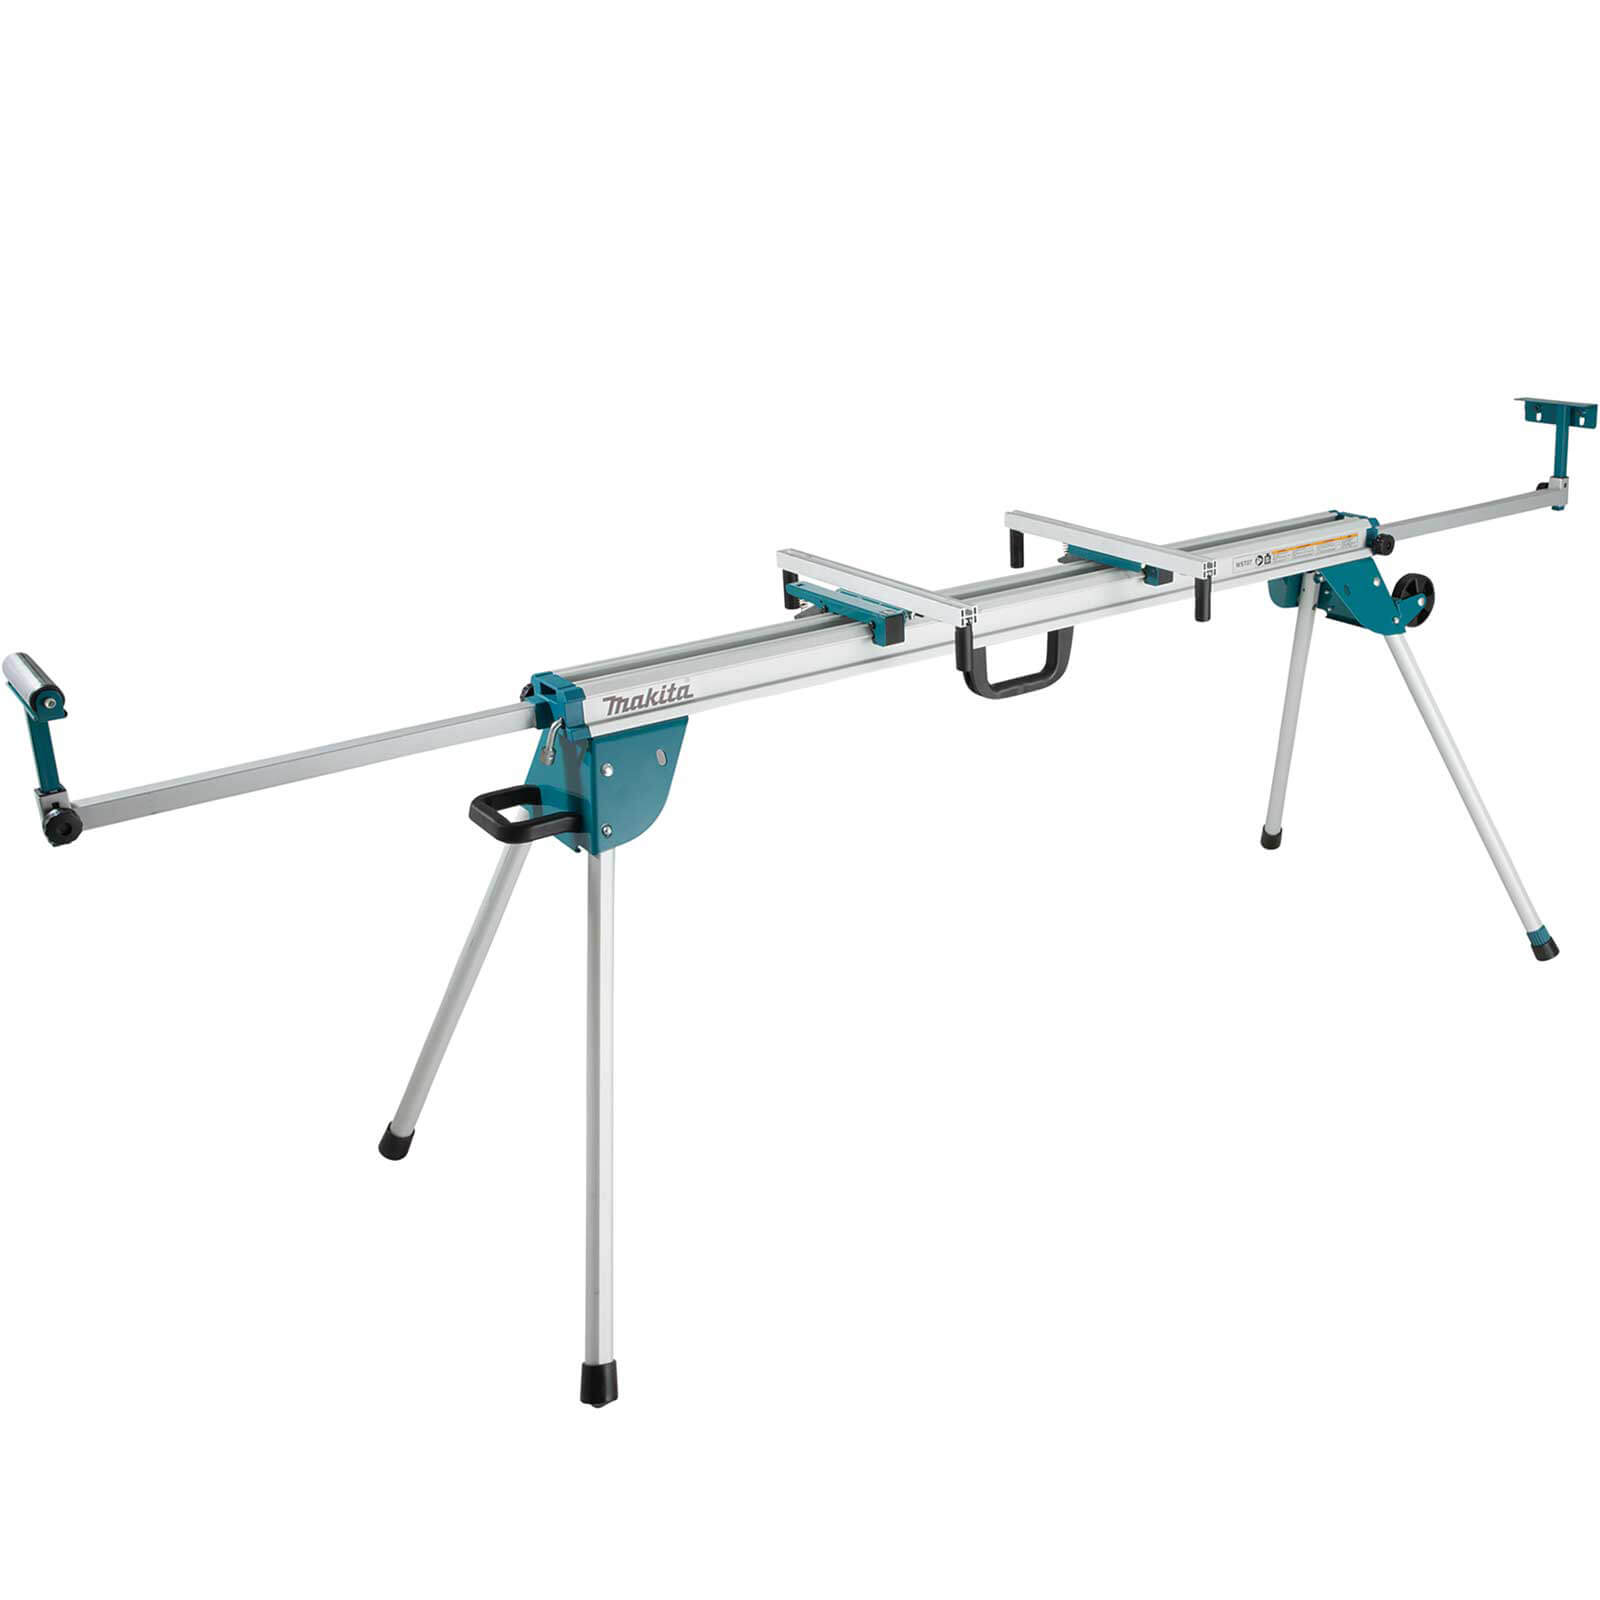 Photo of Makita Wst07 Universal Mitre Saw Stand